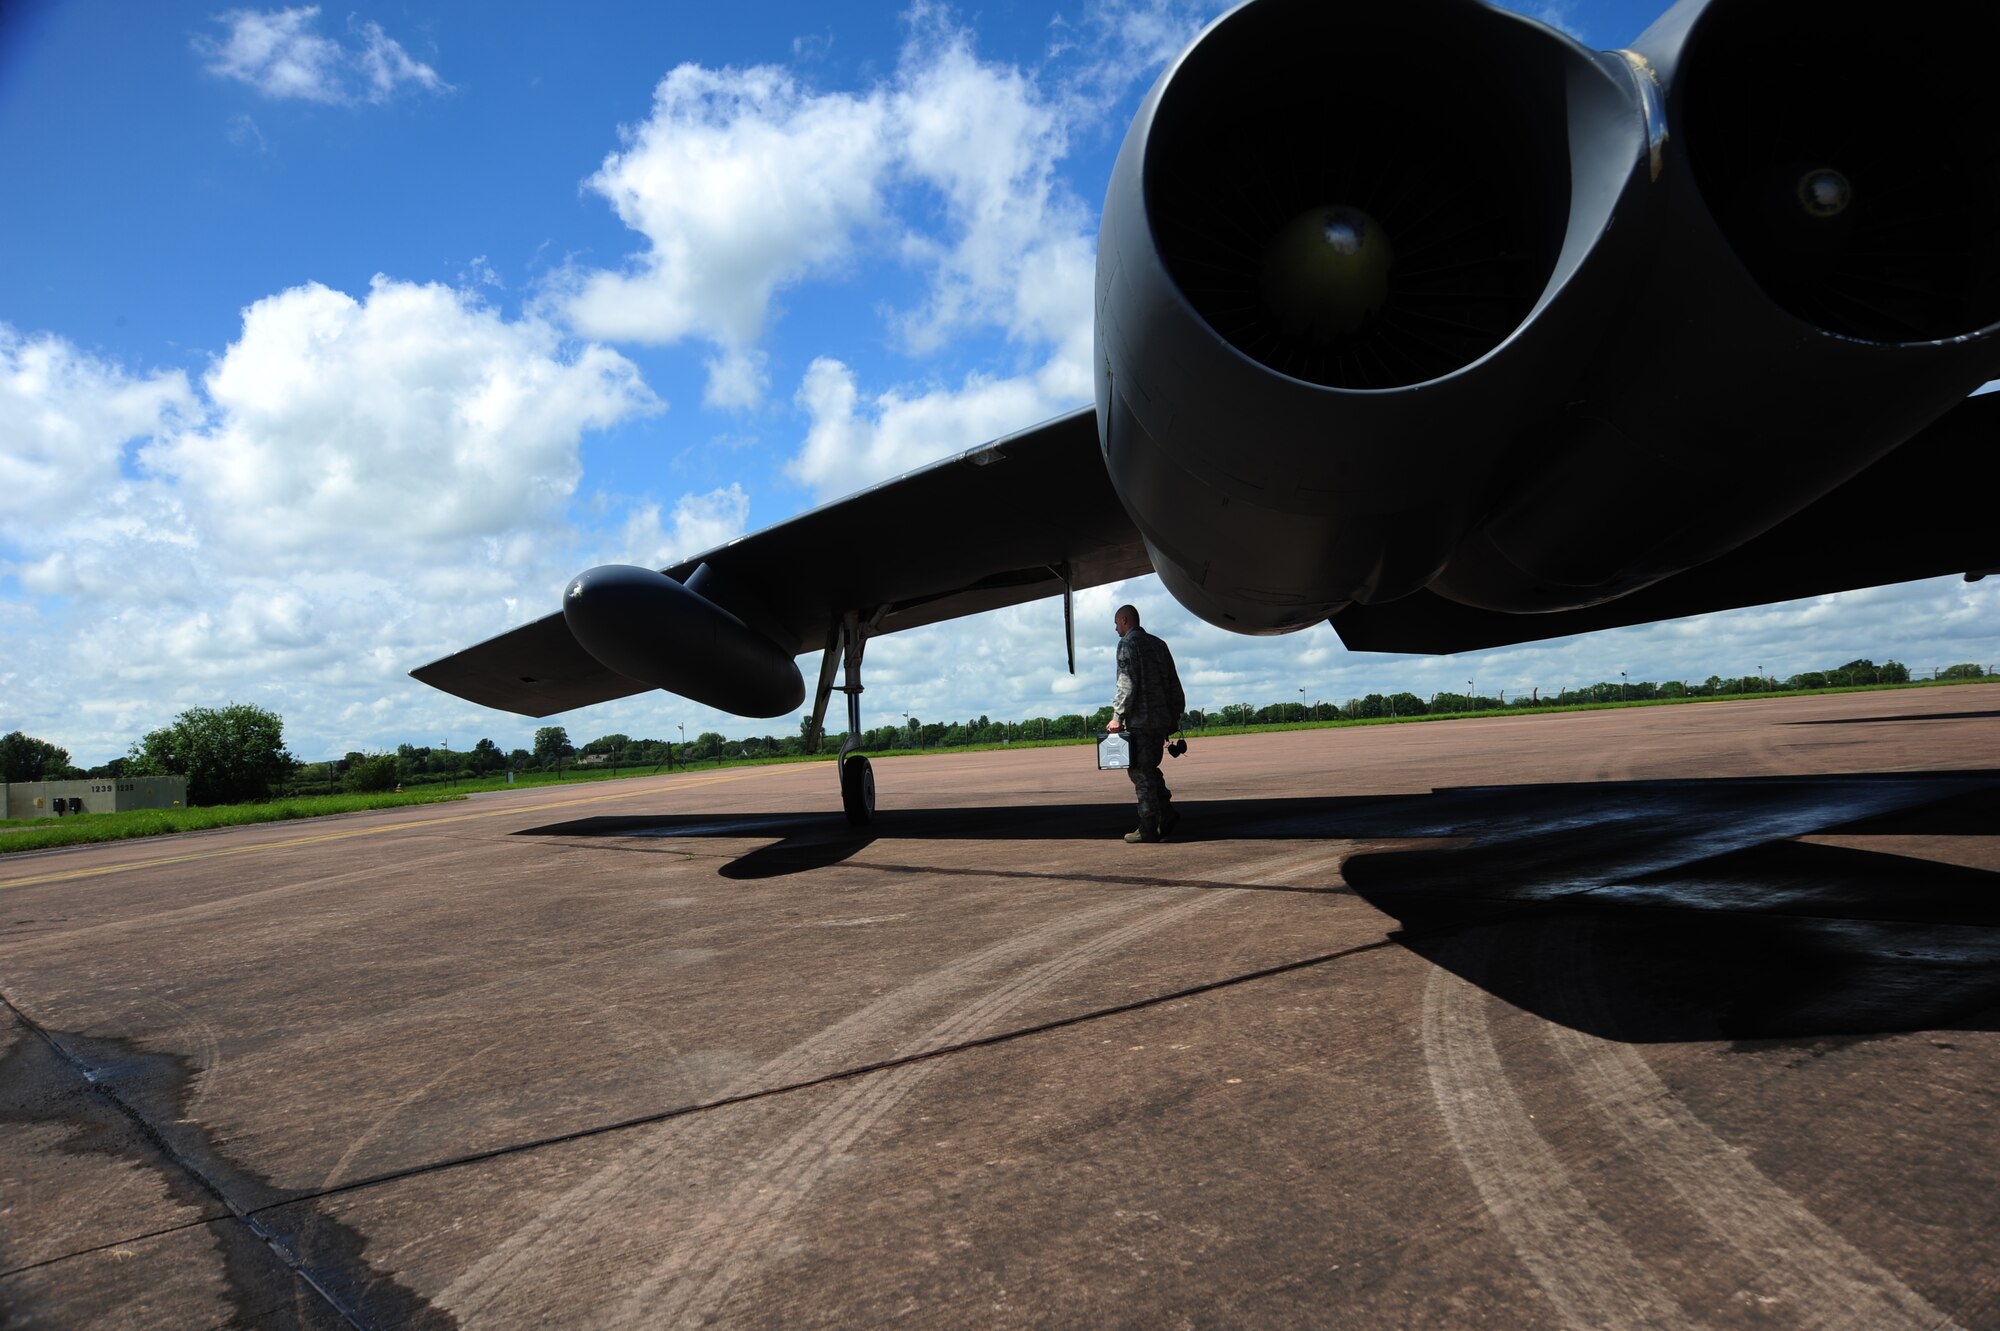 Staff Sgt. Wesley Beard, 2nd Maintenance Squadron crew chief, Minot Air Force Base, N.D., perform a visual inspection on the tail of a B-52 at Royal Air Force Base Fairford, United Kingdom, June 7, 2014. The B-52 Stratofortress is a long-range, heavy bomber that can perform a variety of missions. The bomber is capable of flying at high subsonic speeds at altitudes up to 50,000 feet. (U.S. Air Force photo by Staff Sgt. Nick Wilson/Released)